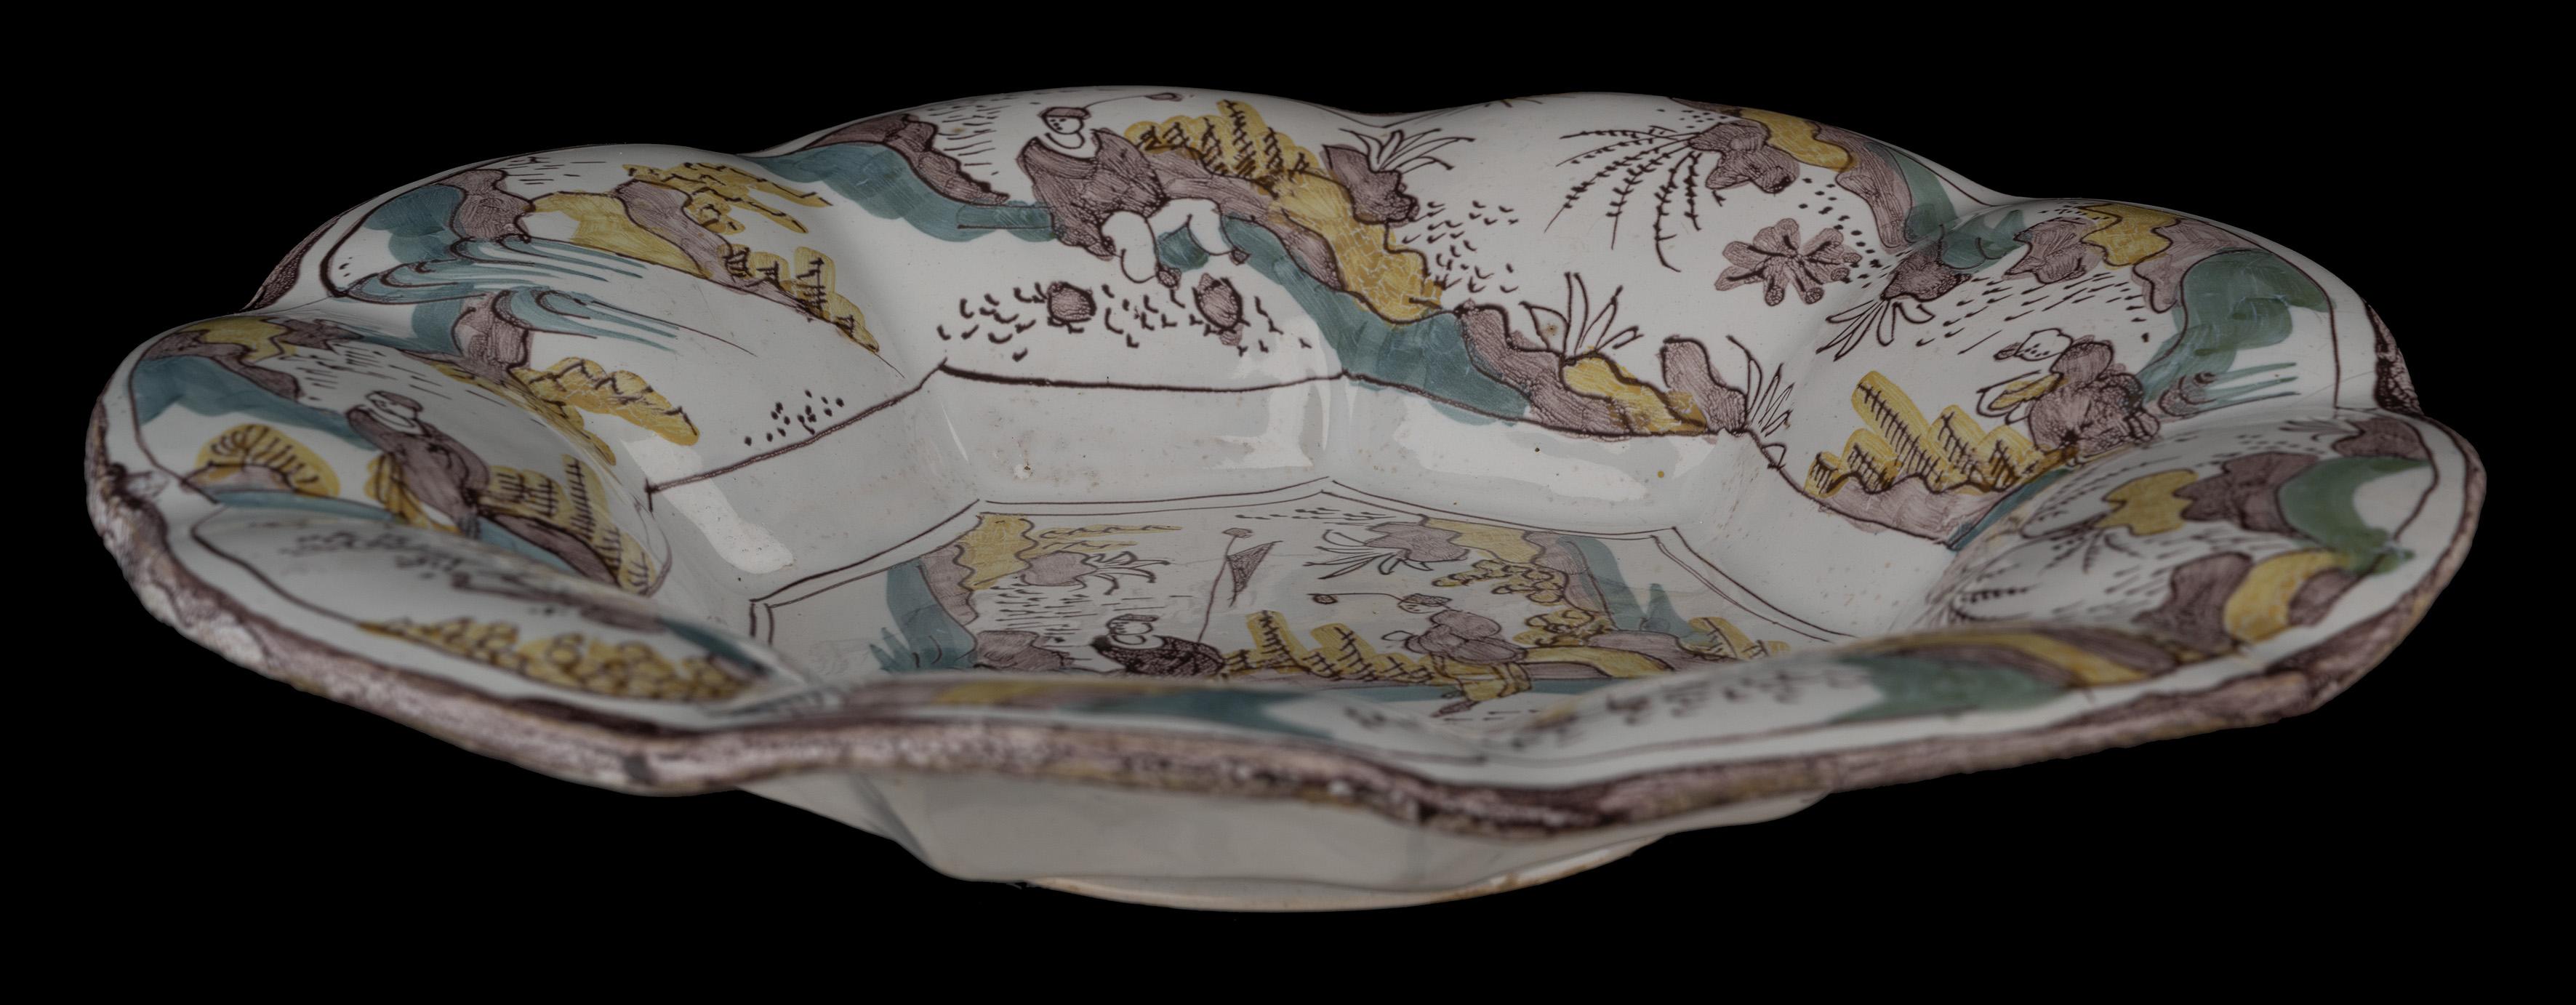 Baroque Polychrome Chinoiserie Lobed Dish Delft, 1680-1690 For Sale